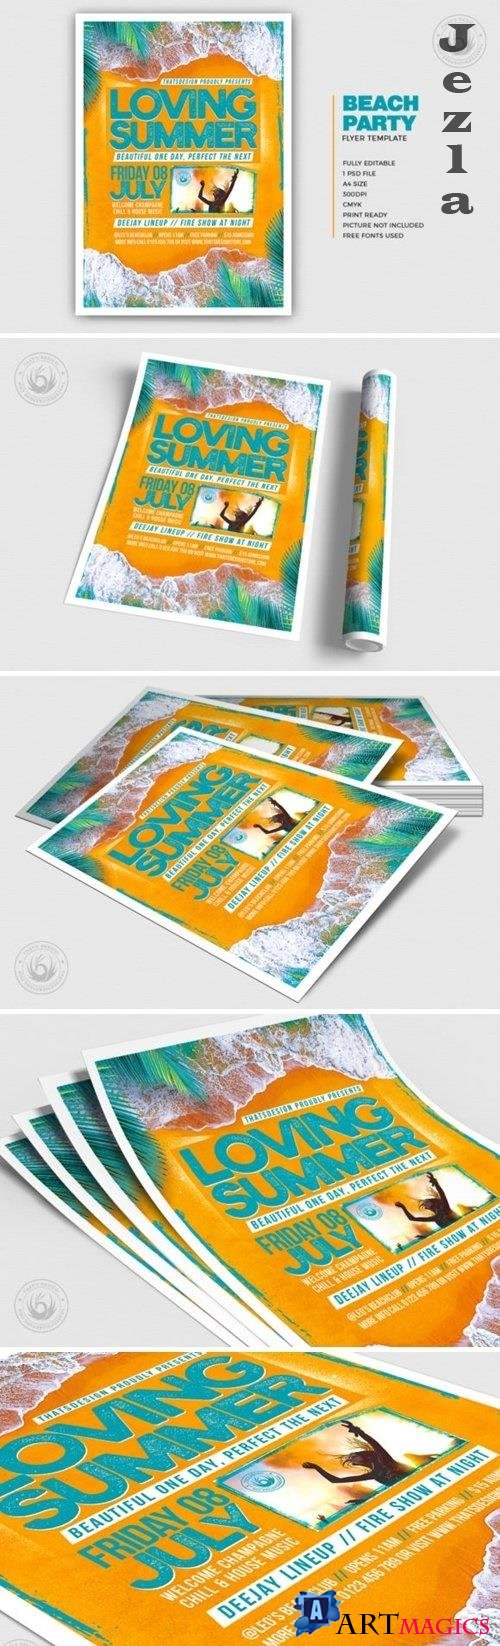 Beach Party Flyer Template V9 - 4870354